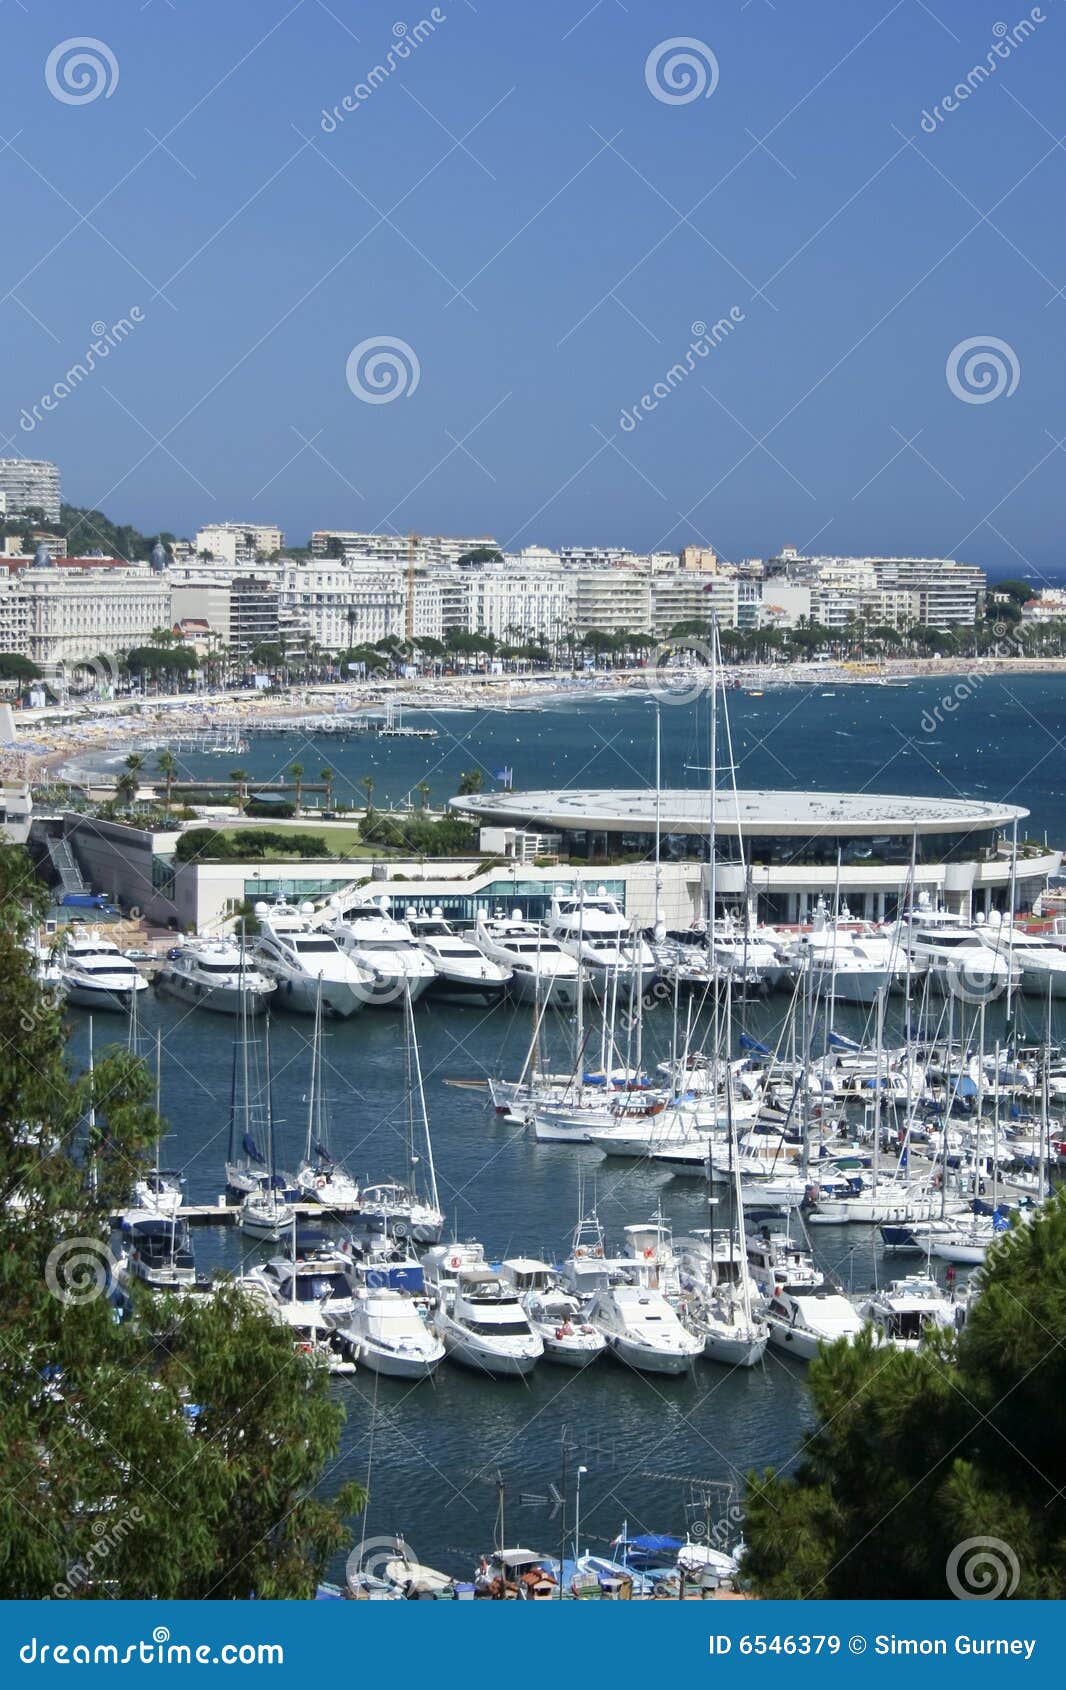 yachts cannes marina south of france riviera